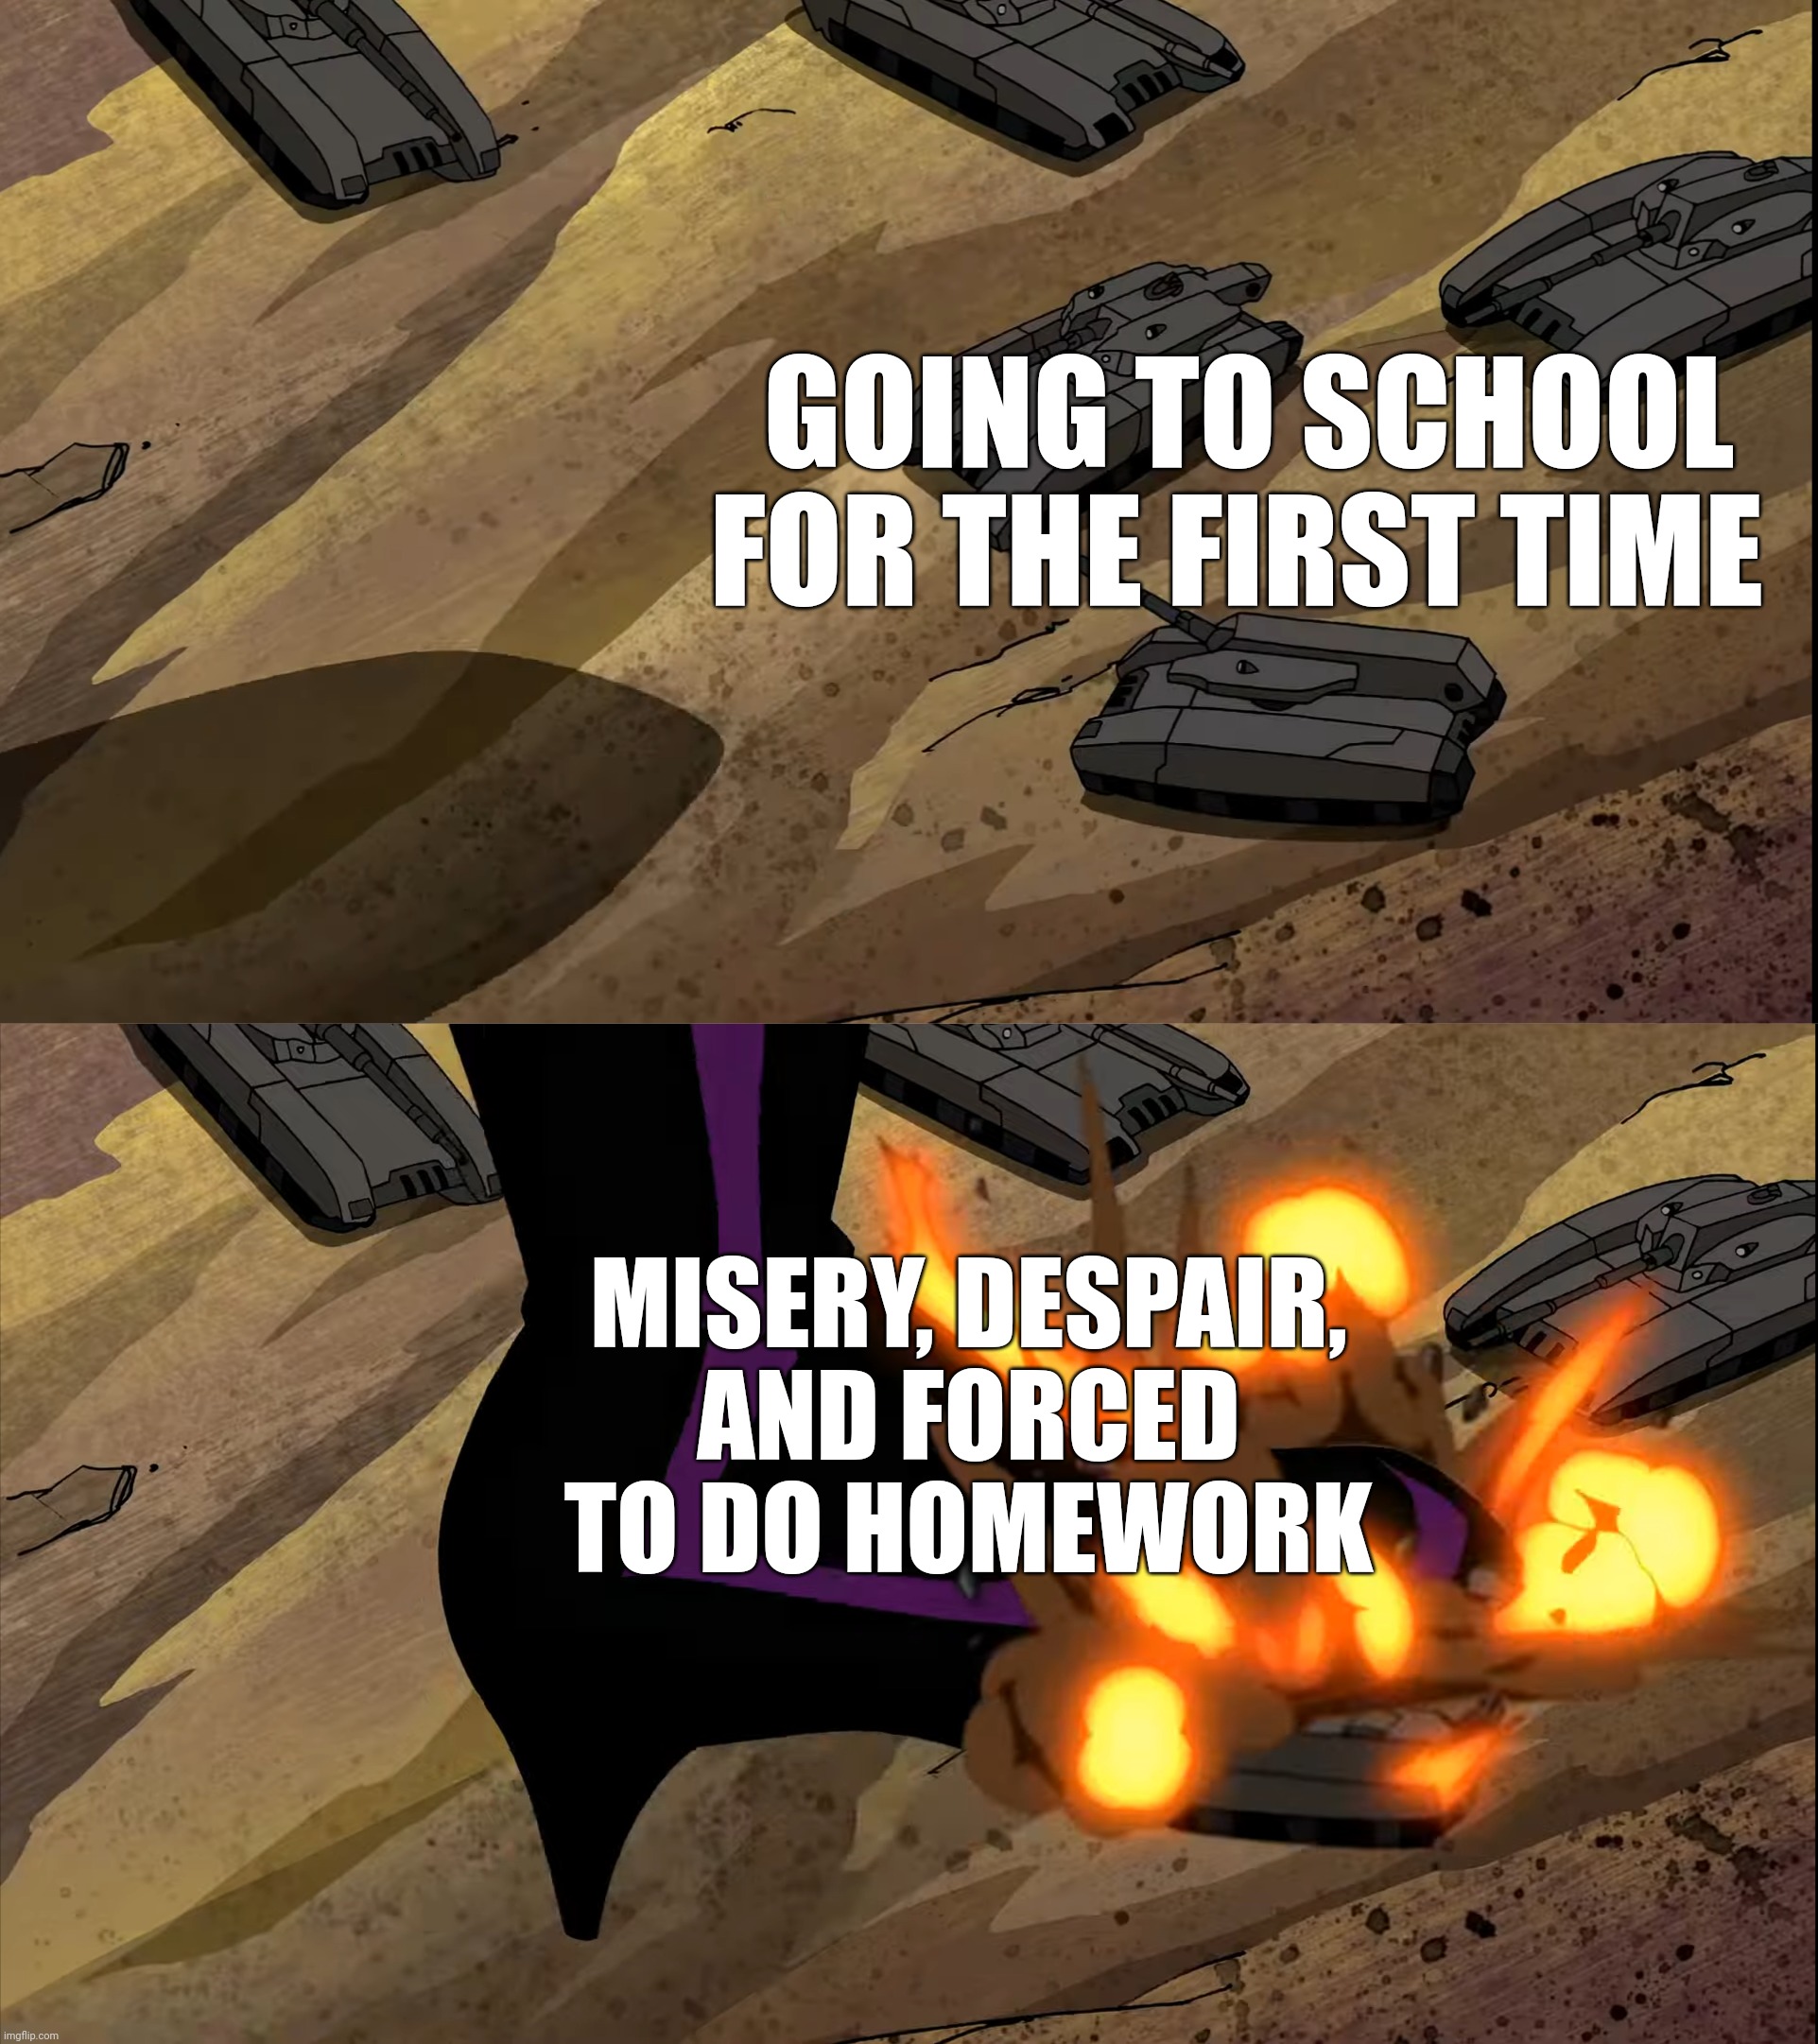 People when they go to school for the first time | GOING TO SCHOOL FOR THE FIRST TIME; MISERY, DESPAIR,
AND FORCED TO DO HOMEWORK | image tagged in school,homework,misery,despair | made w/ Imgflip meme maker